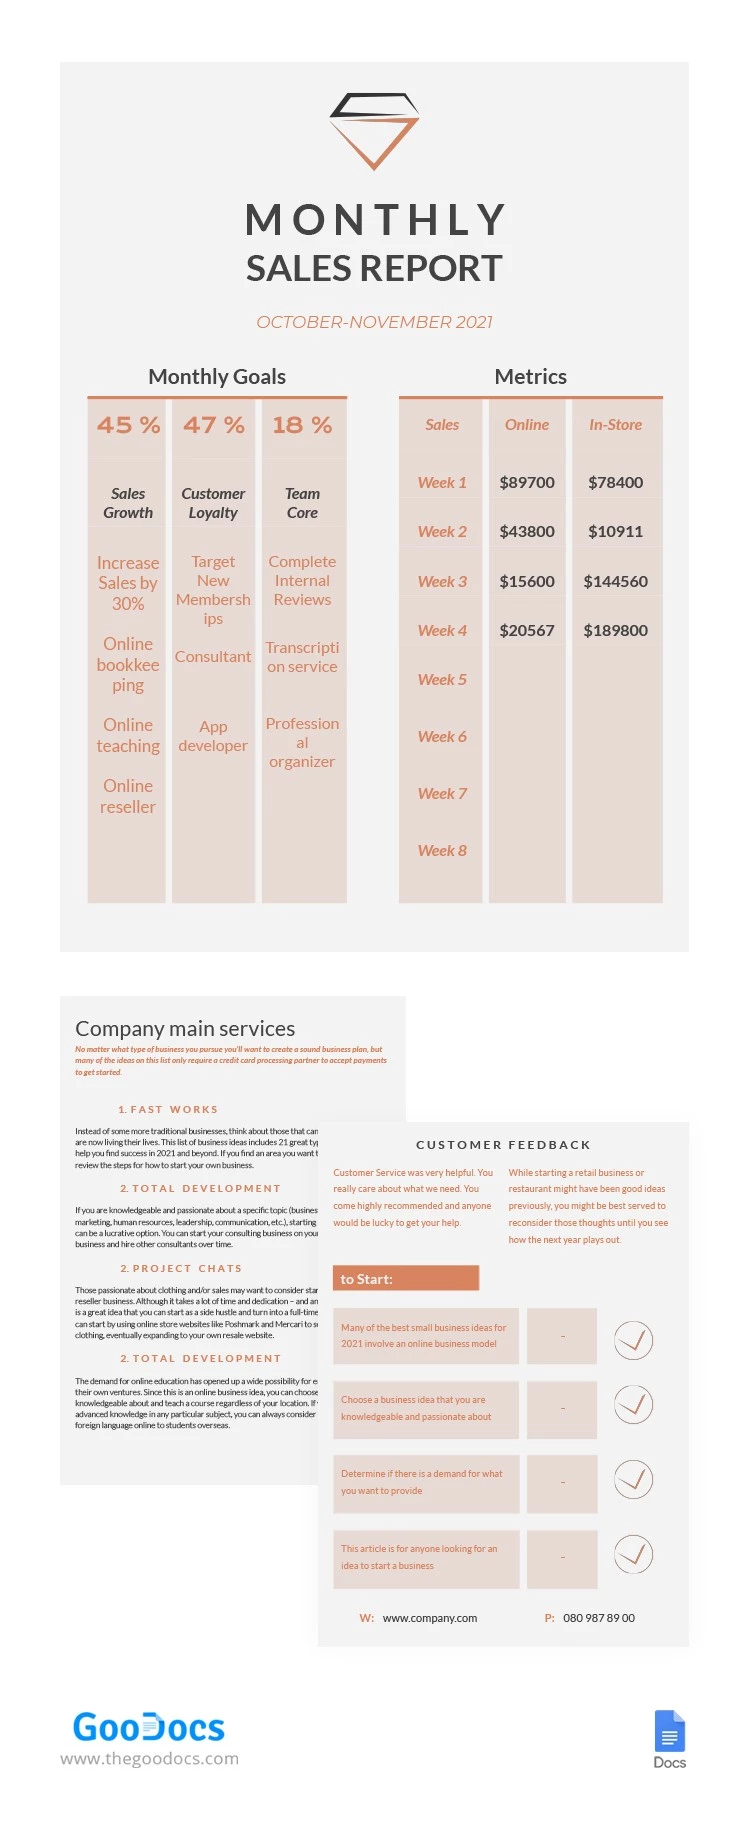 Monthly Sales Report - free Google Docs Template - 10062156